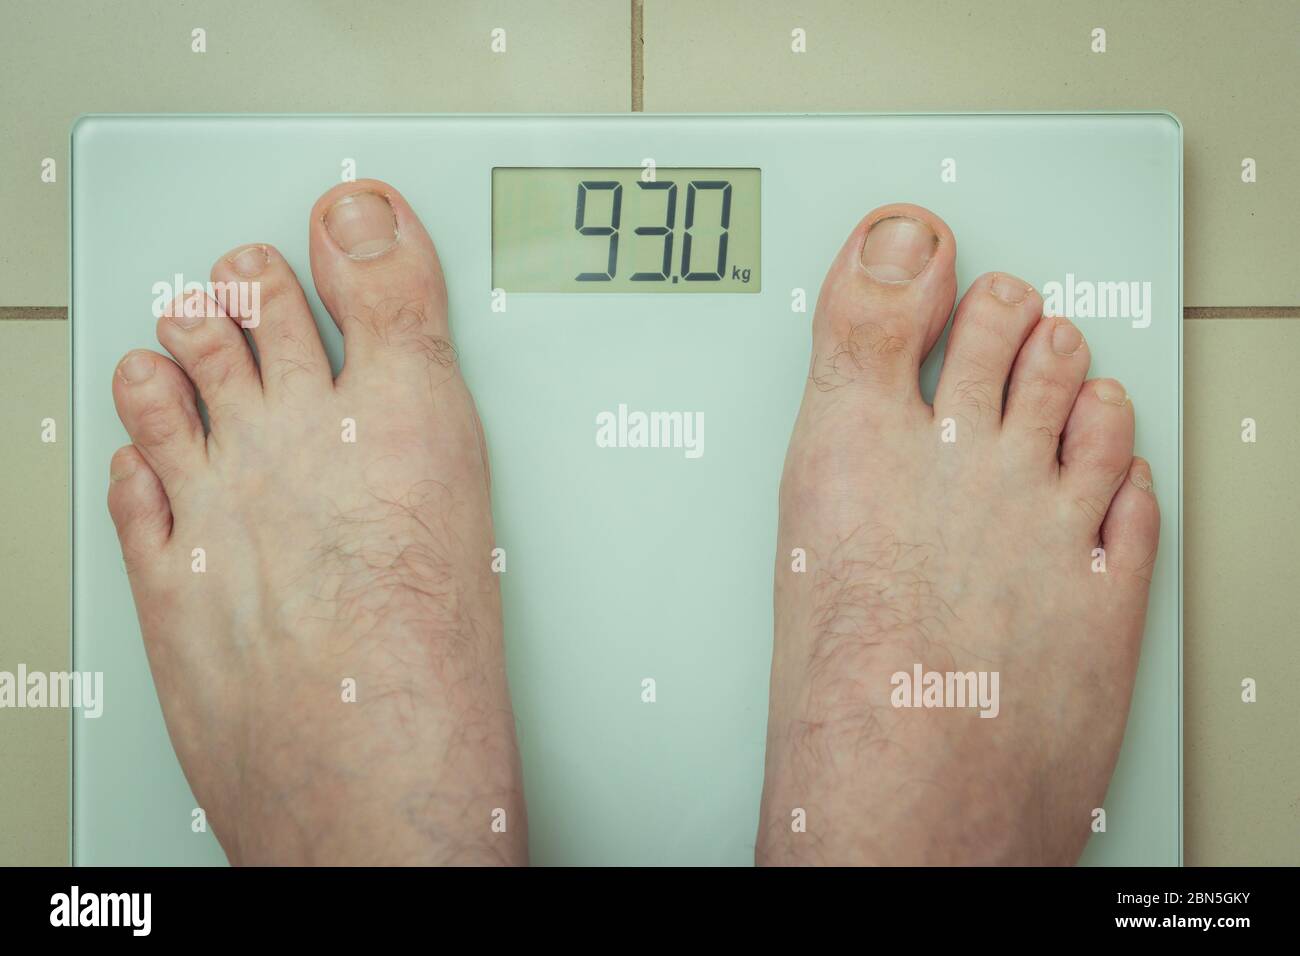 Male Feet Glass Scales Men's Diet Body Weight Close Stock Photo by  ©YAYImages 323776374